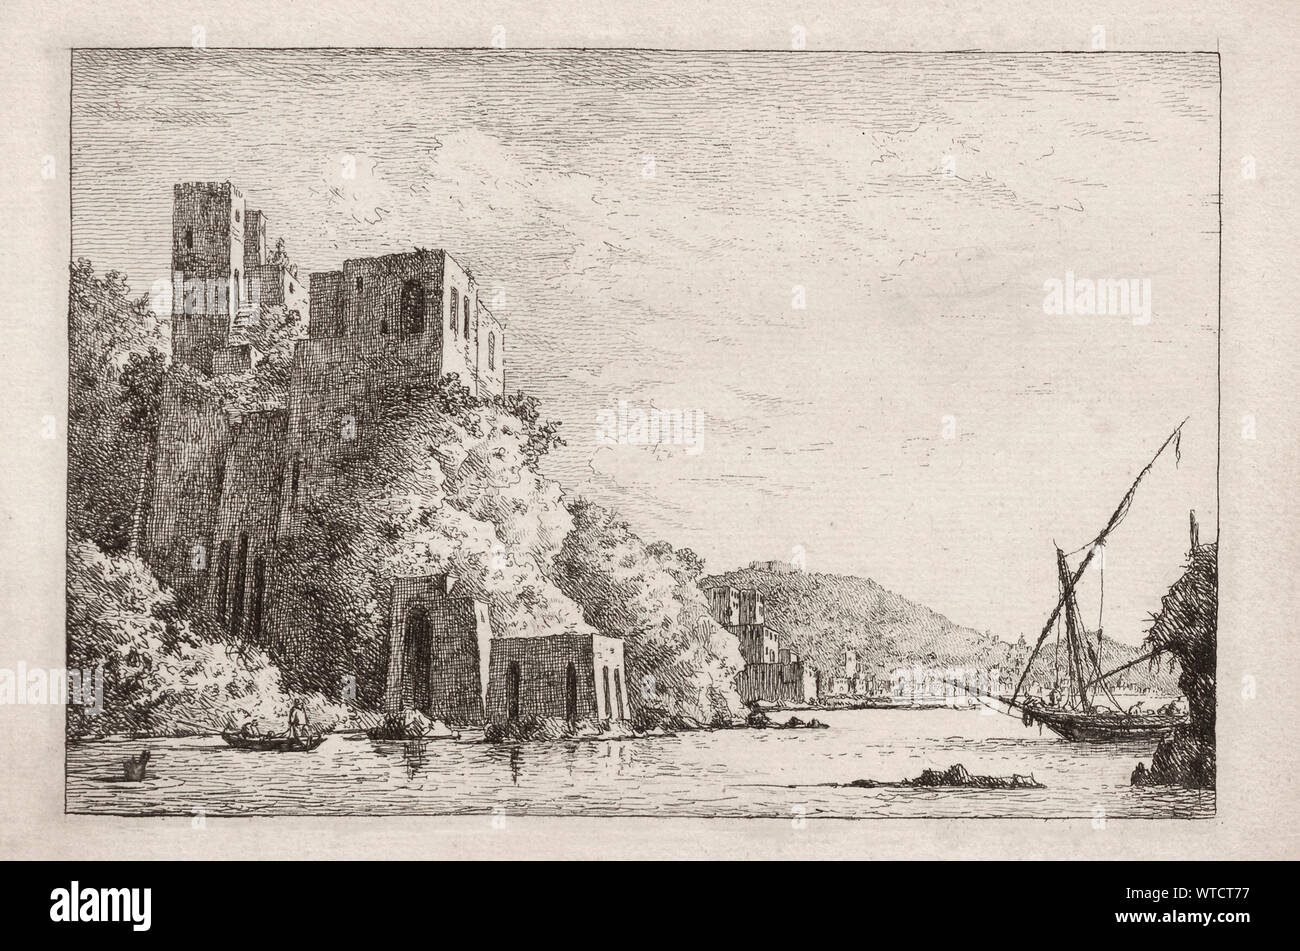 Etching of the port of Civita Vecchia in Italy. Etchings (views in Italy) by William Marlow (1740-1813). Stock Photo